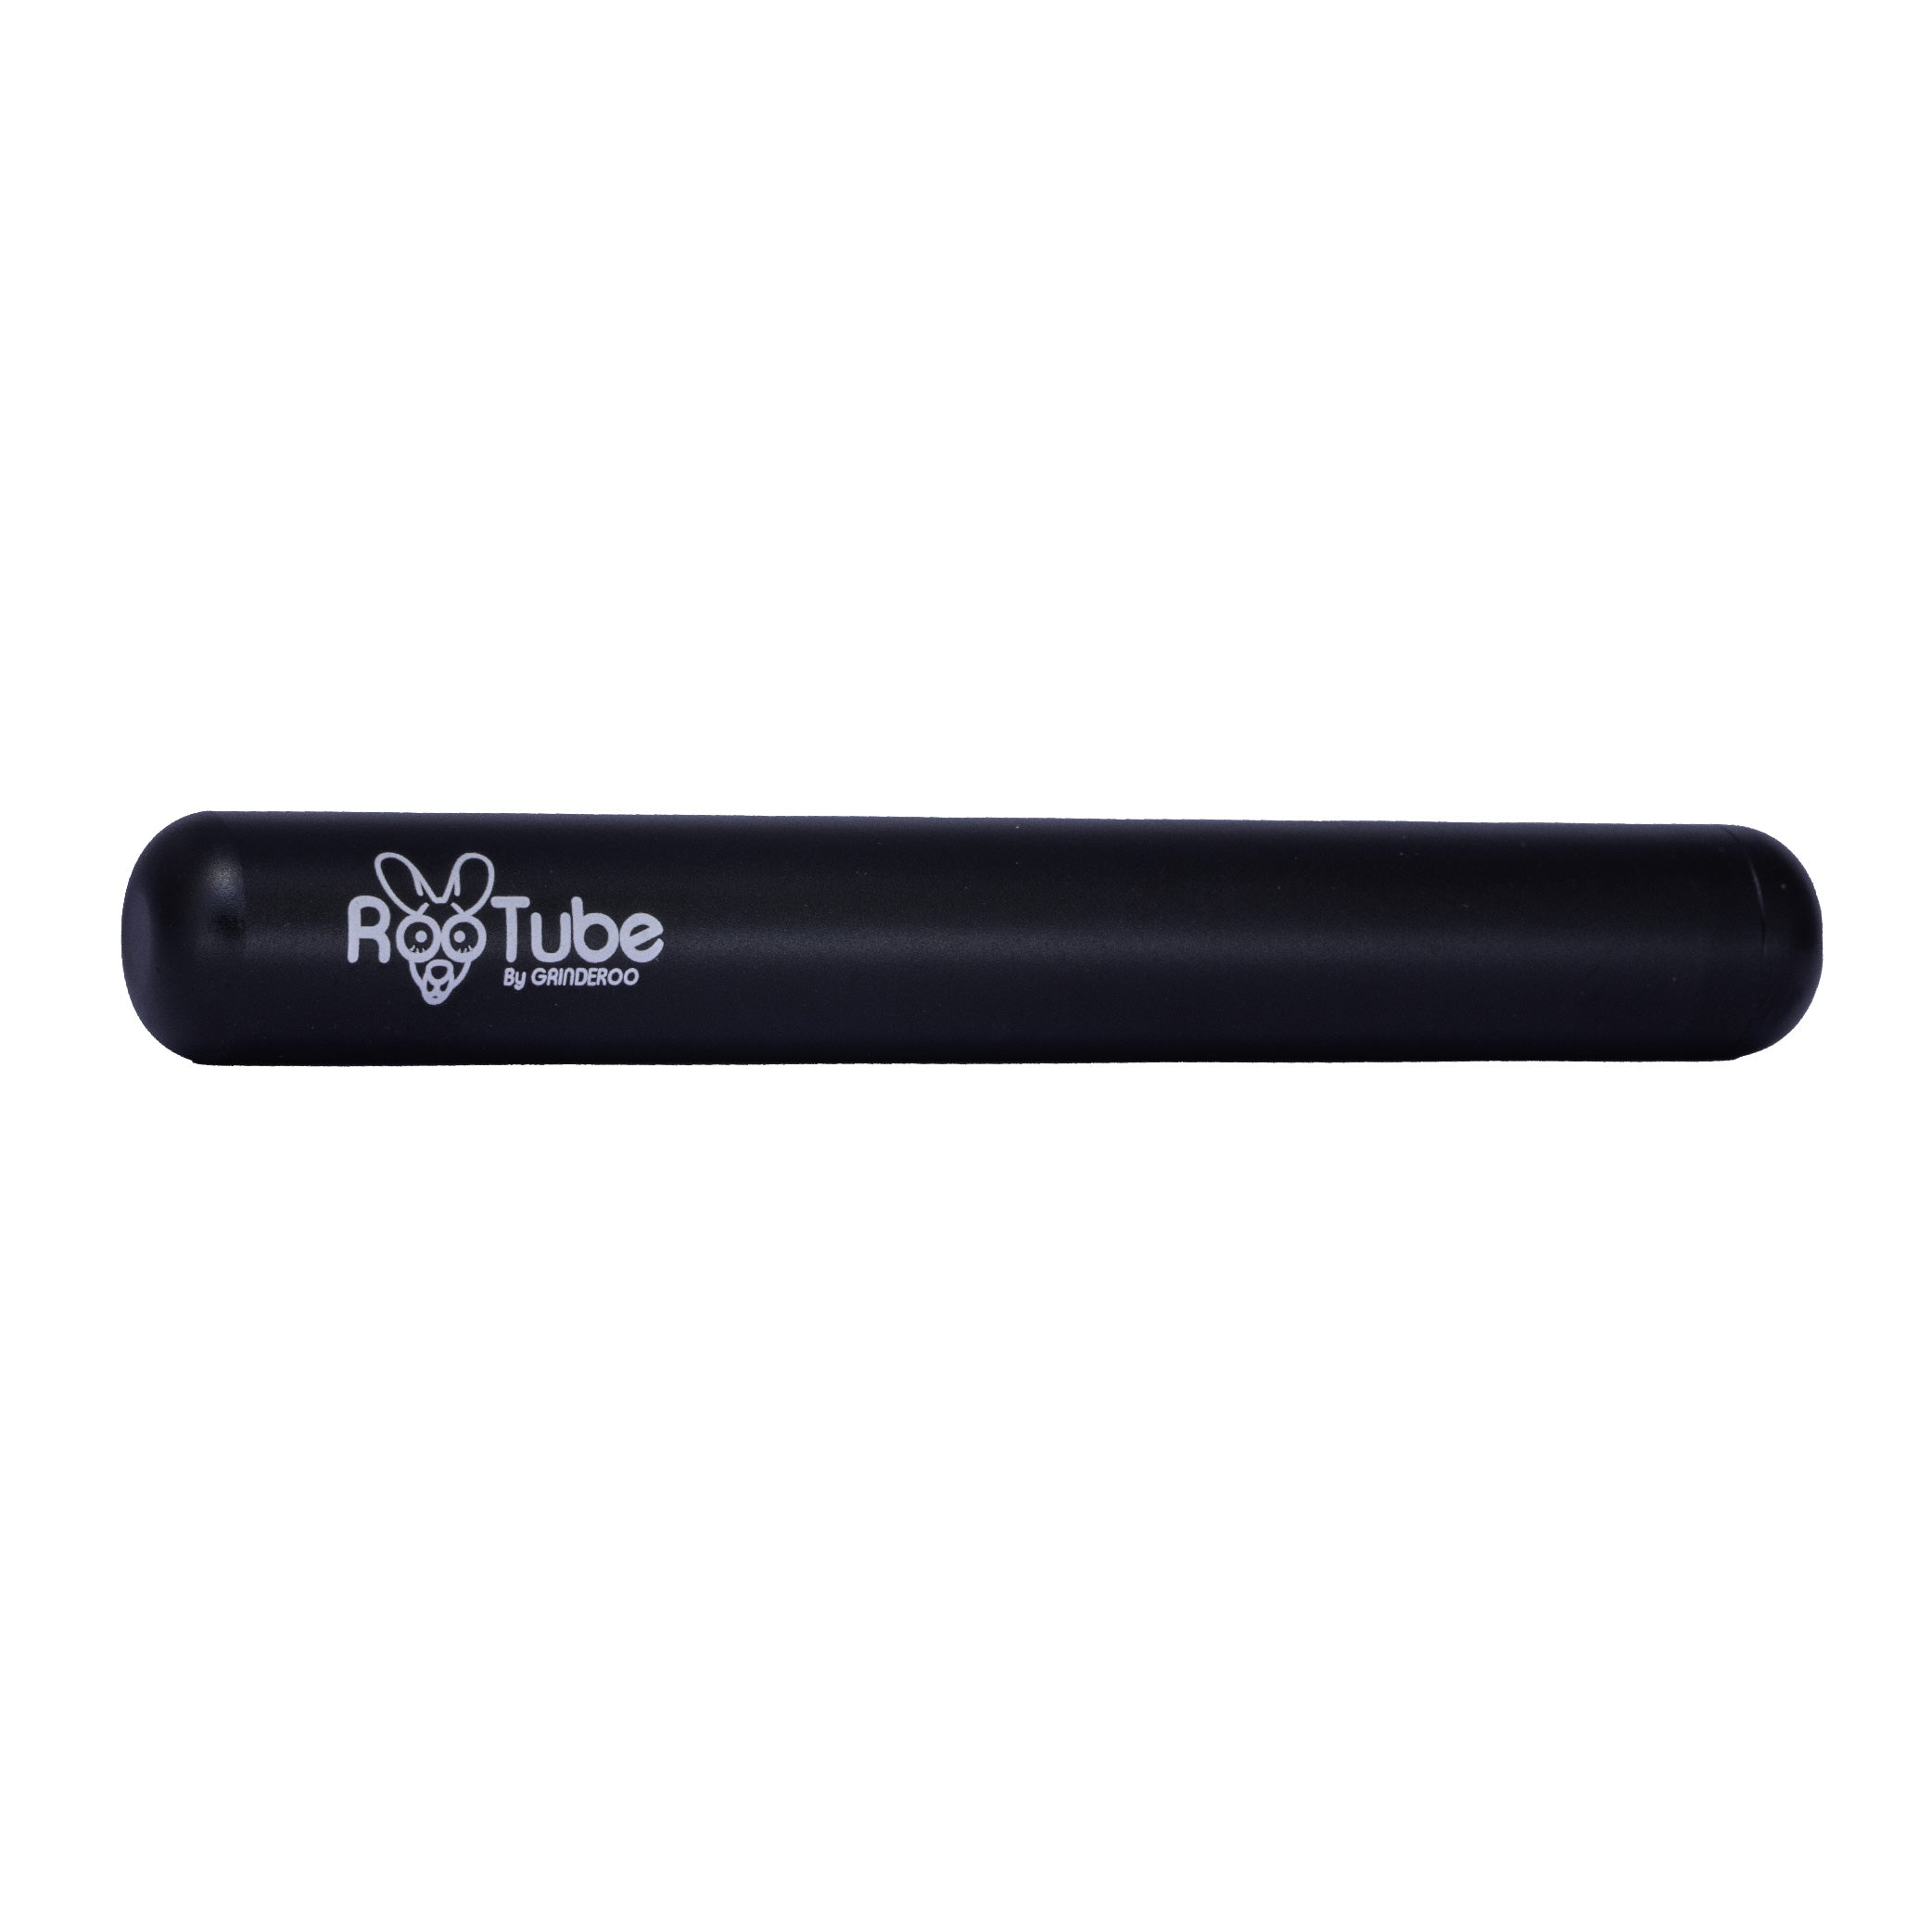 RooTube - Discreet Airtight Smell Proof Case for Pre-Rolls & Cones